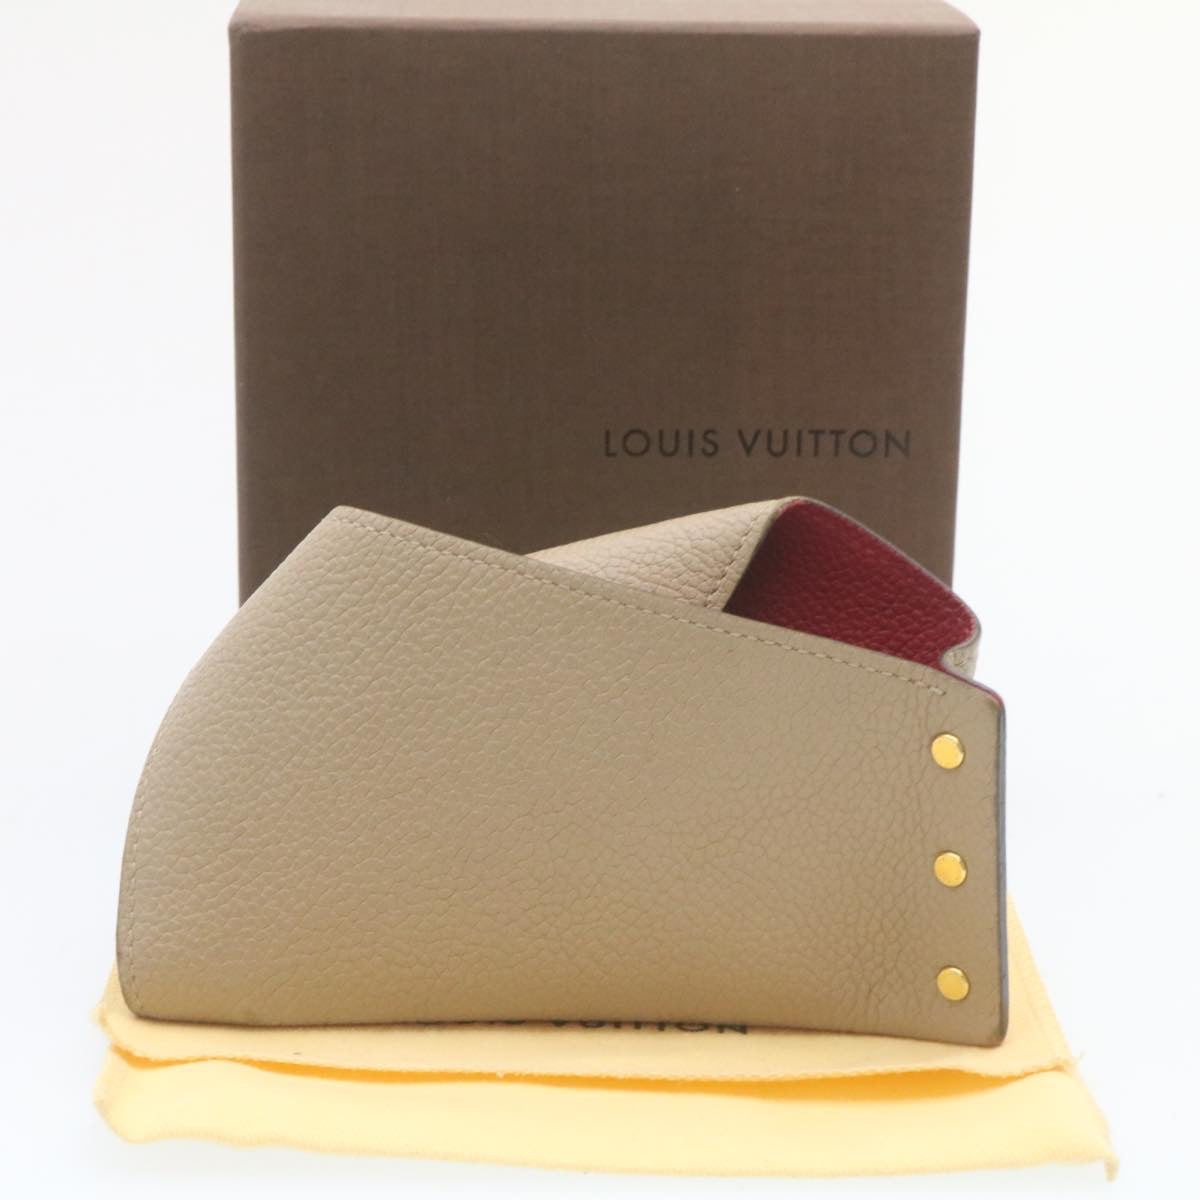 LOUIS VUITTON Taurillon Clemence Leather Key Case Gray LV Auth 28085